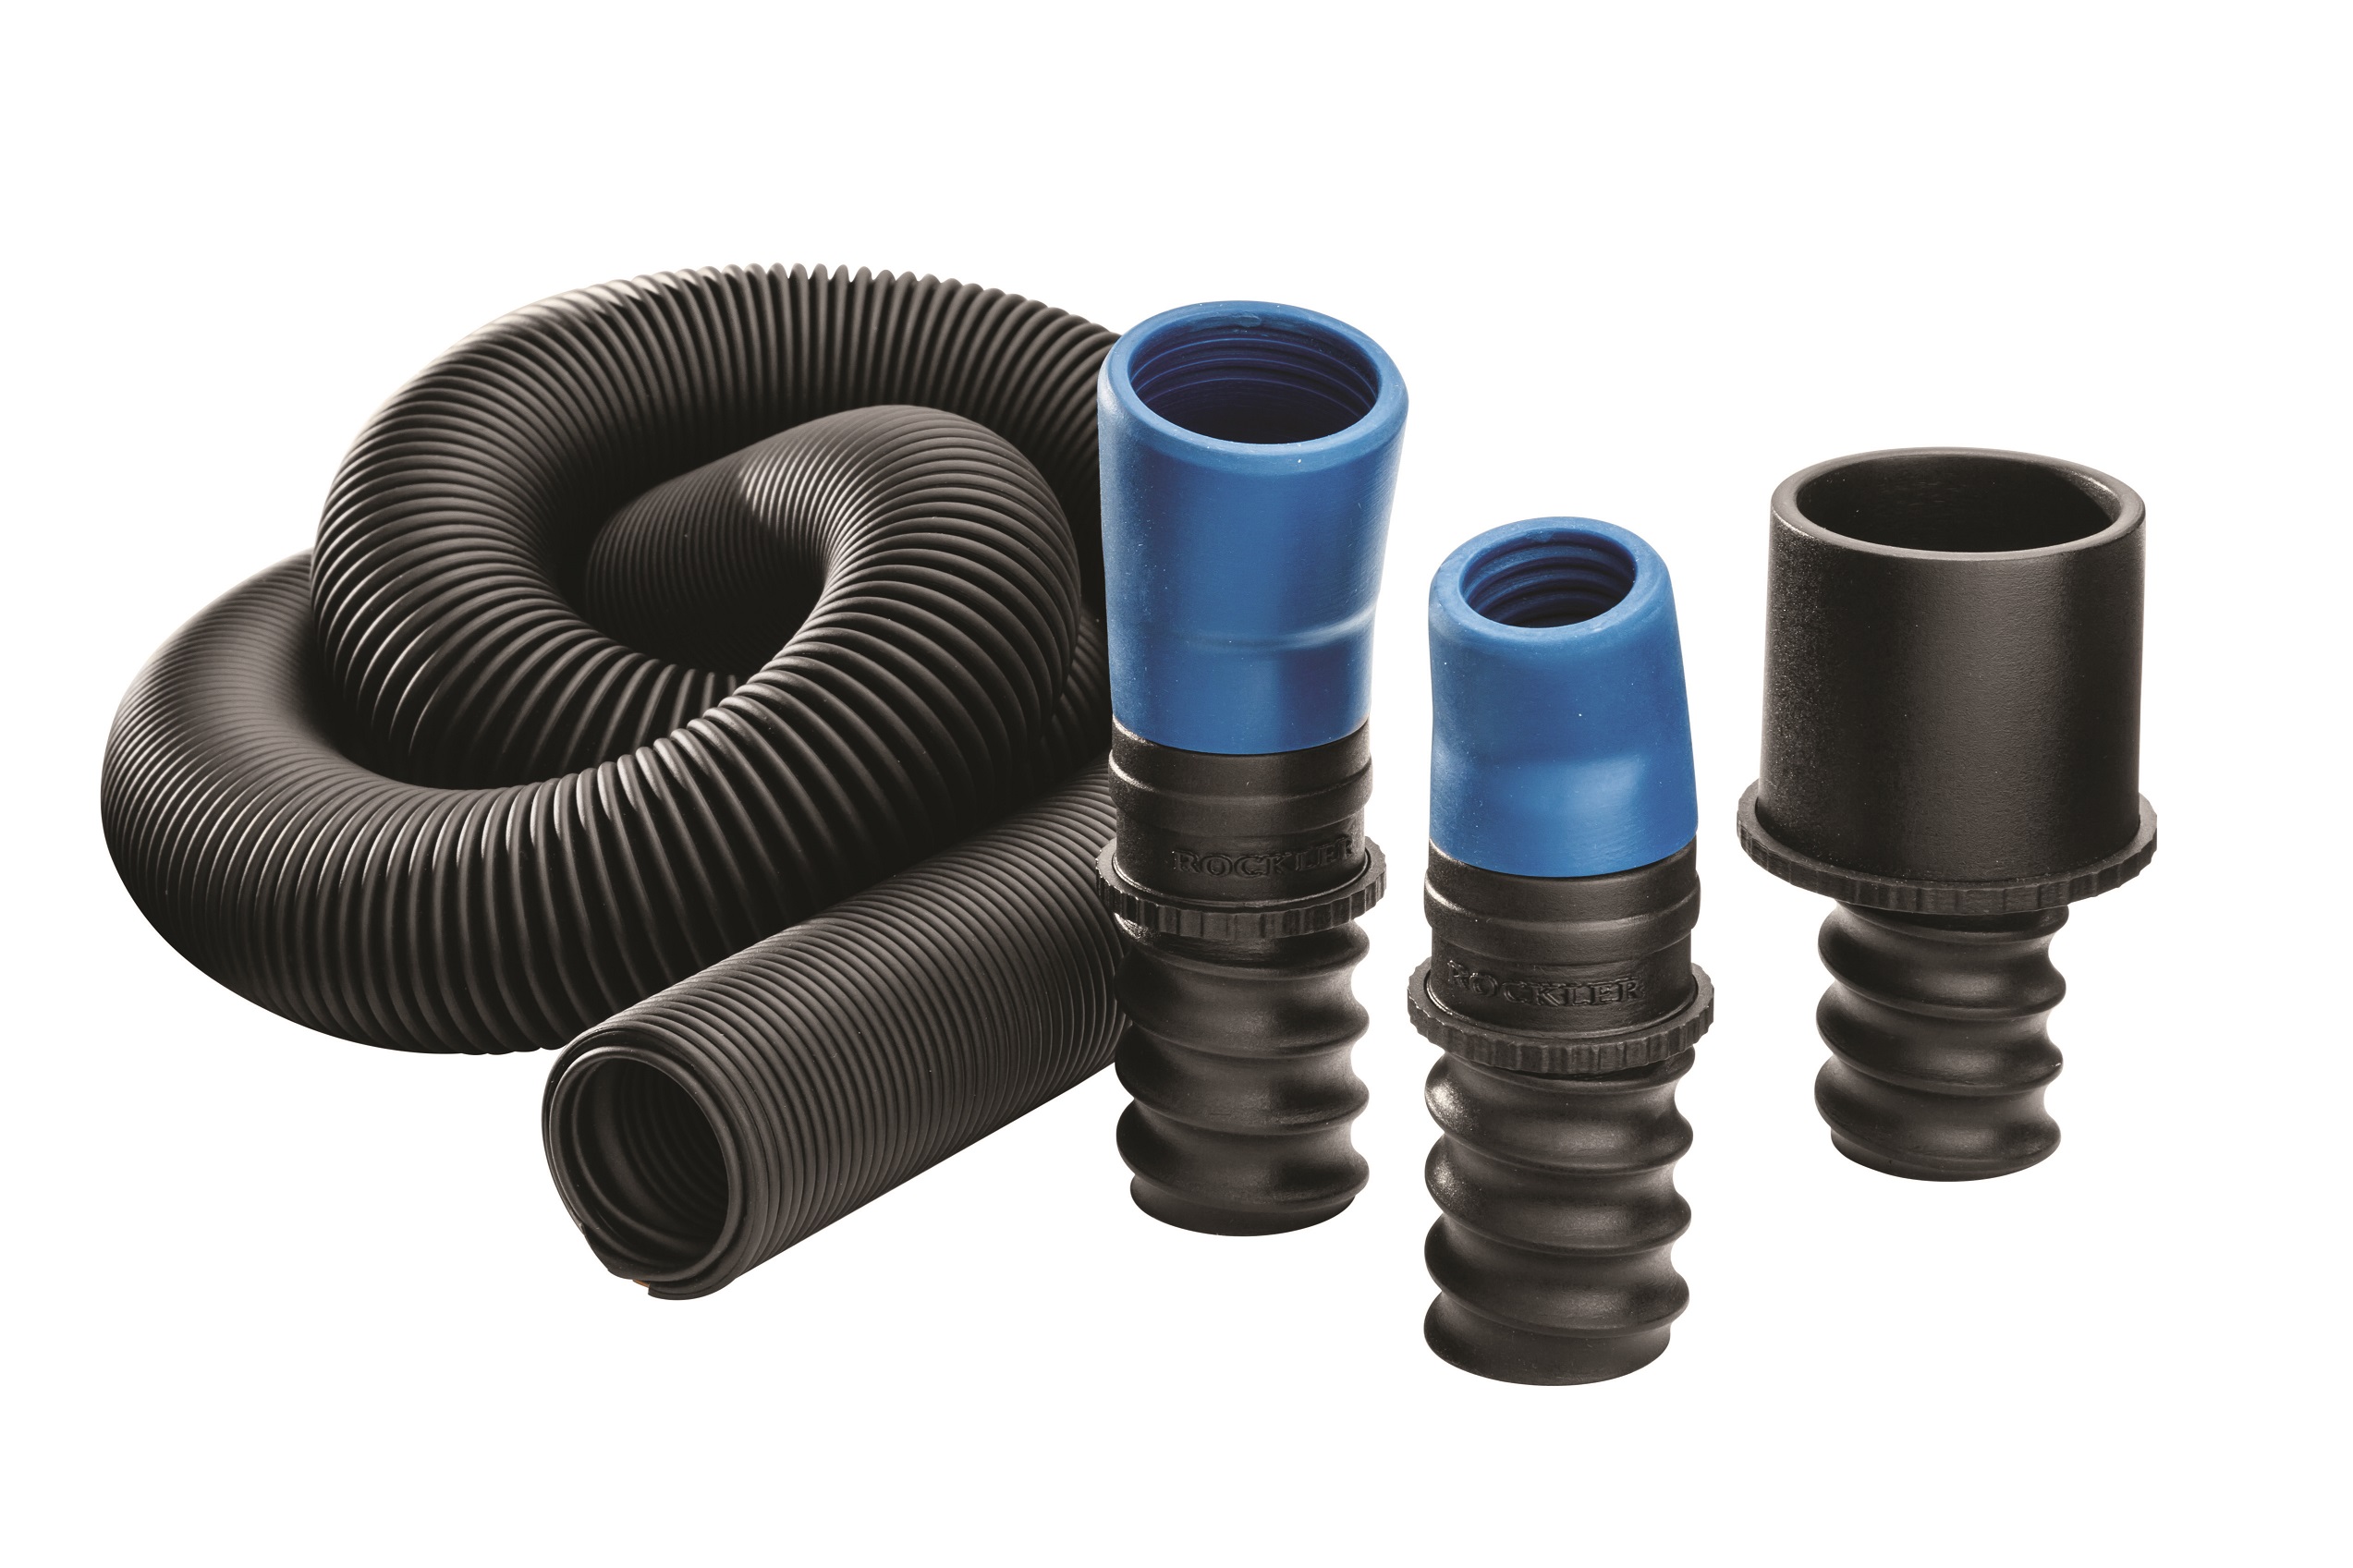 The kit includes also includes a flexible 11⁄2" inside-diameter hose that expands from 3 to 15 feet long.